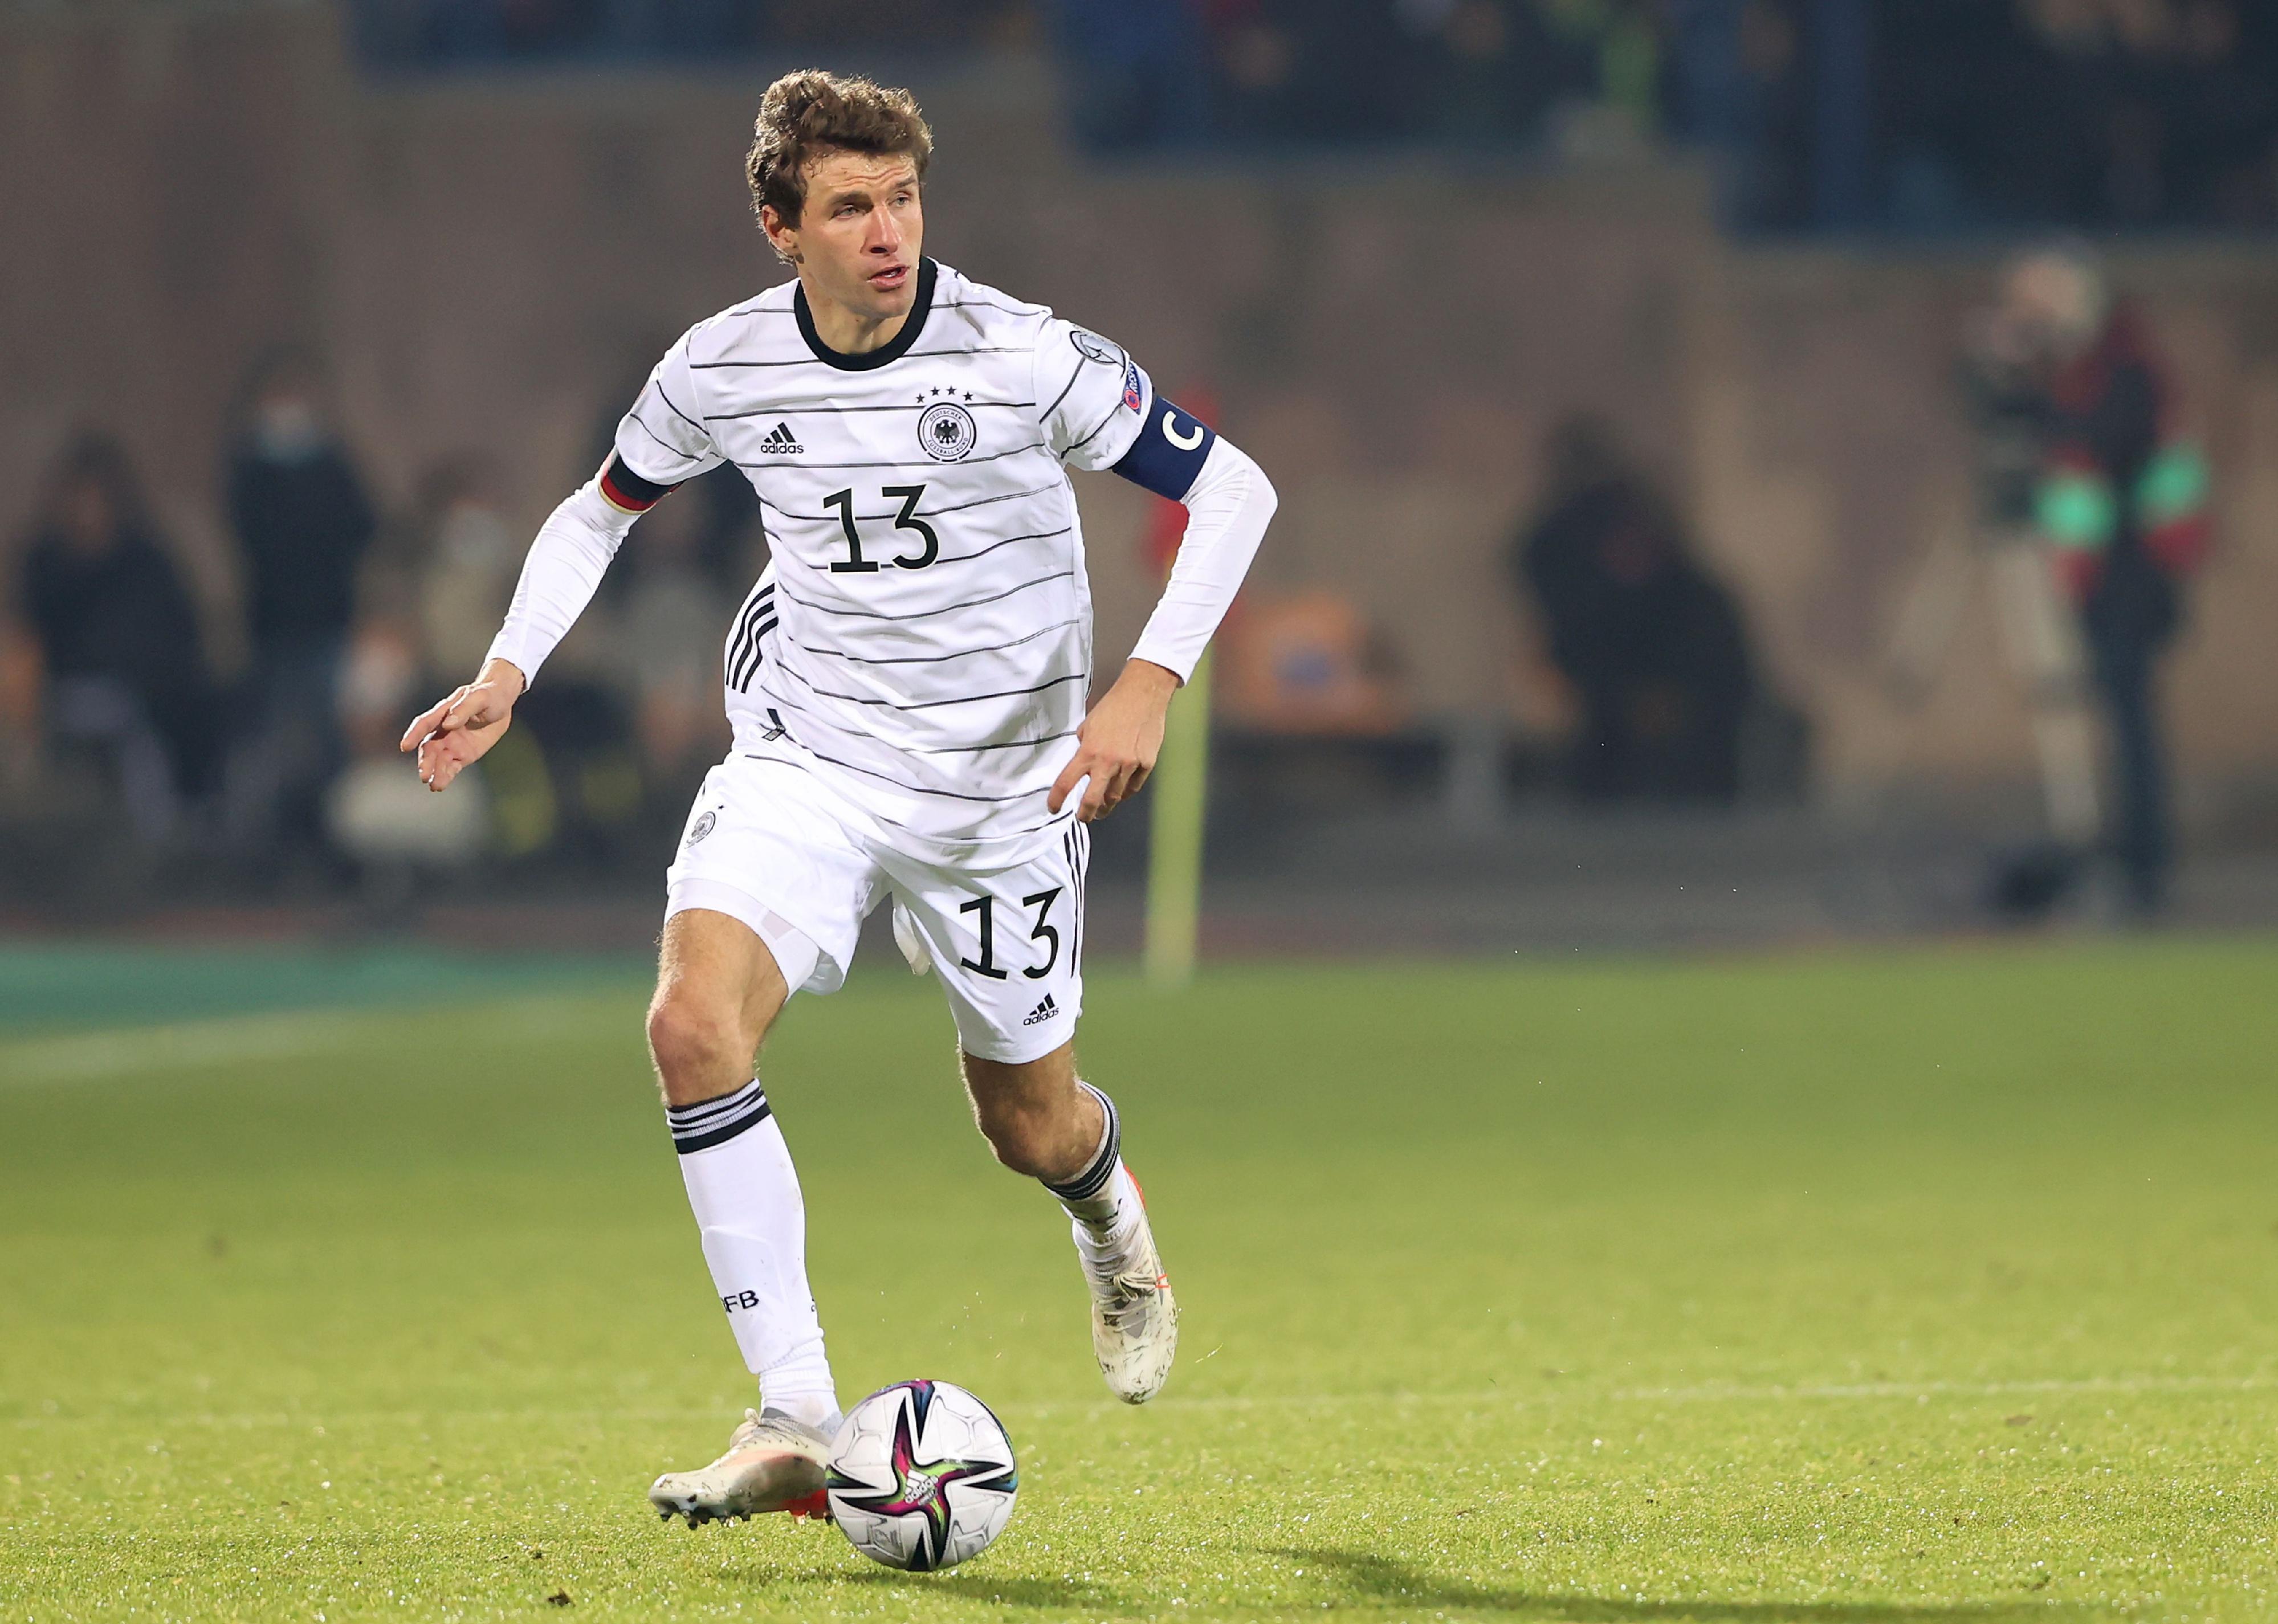 Thomas Müller runs with the ball during the 2022 FIFA World Cup Qualifier match between Armenia and Germany